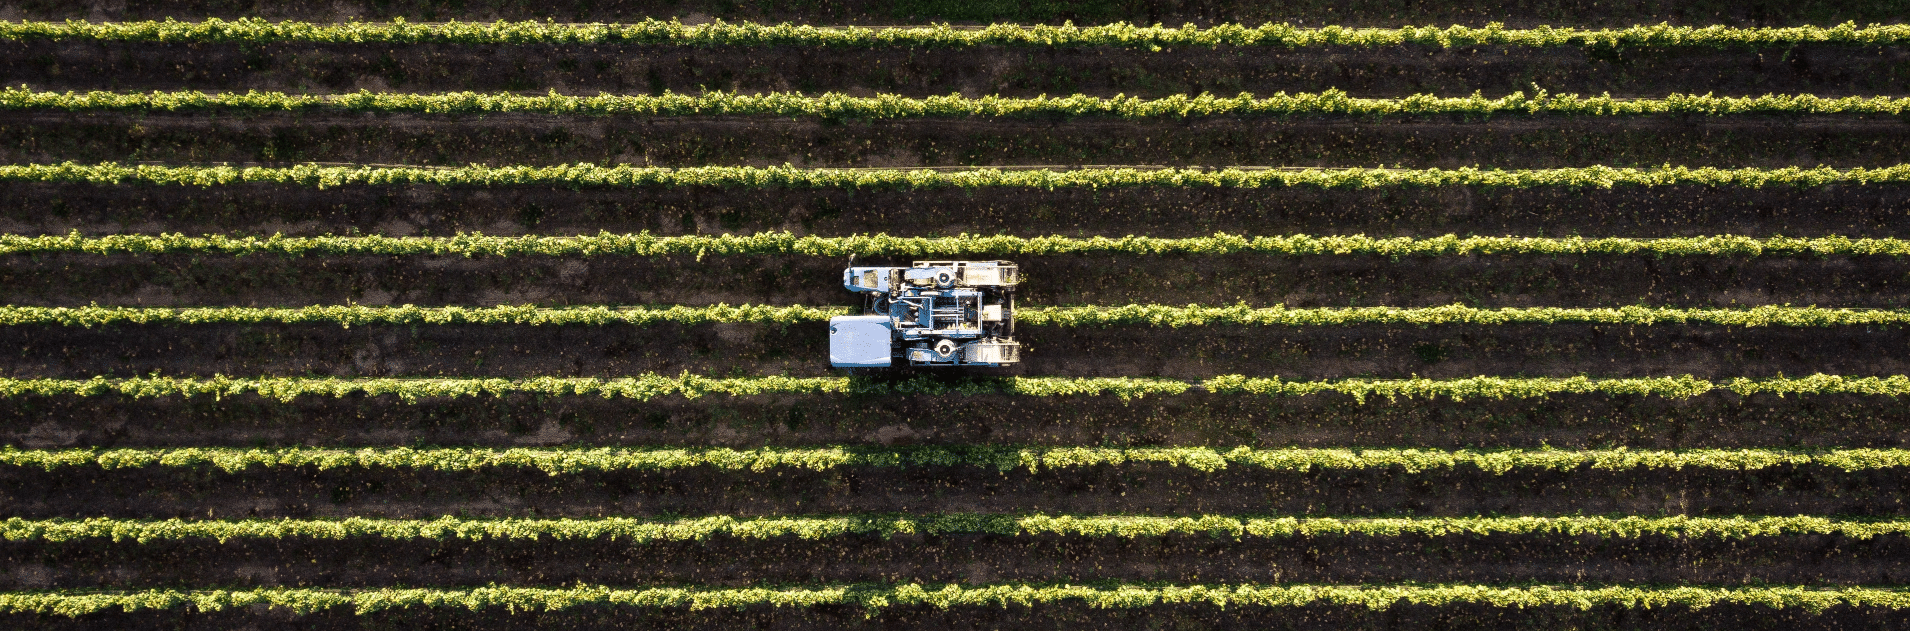 Aerial view of tractor in the field